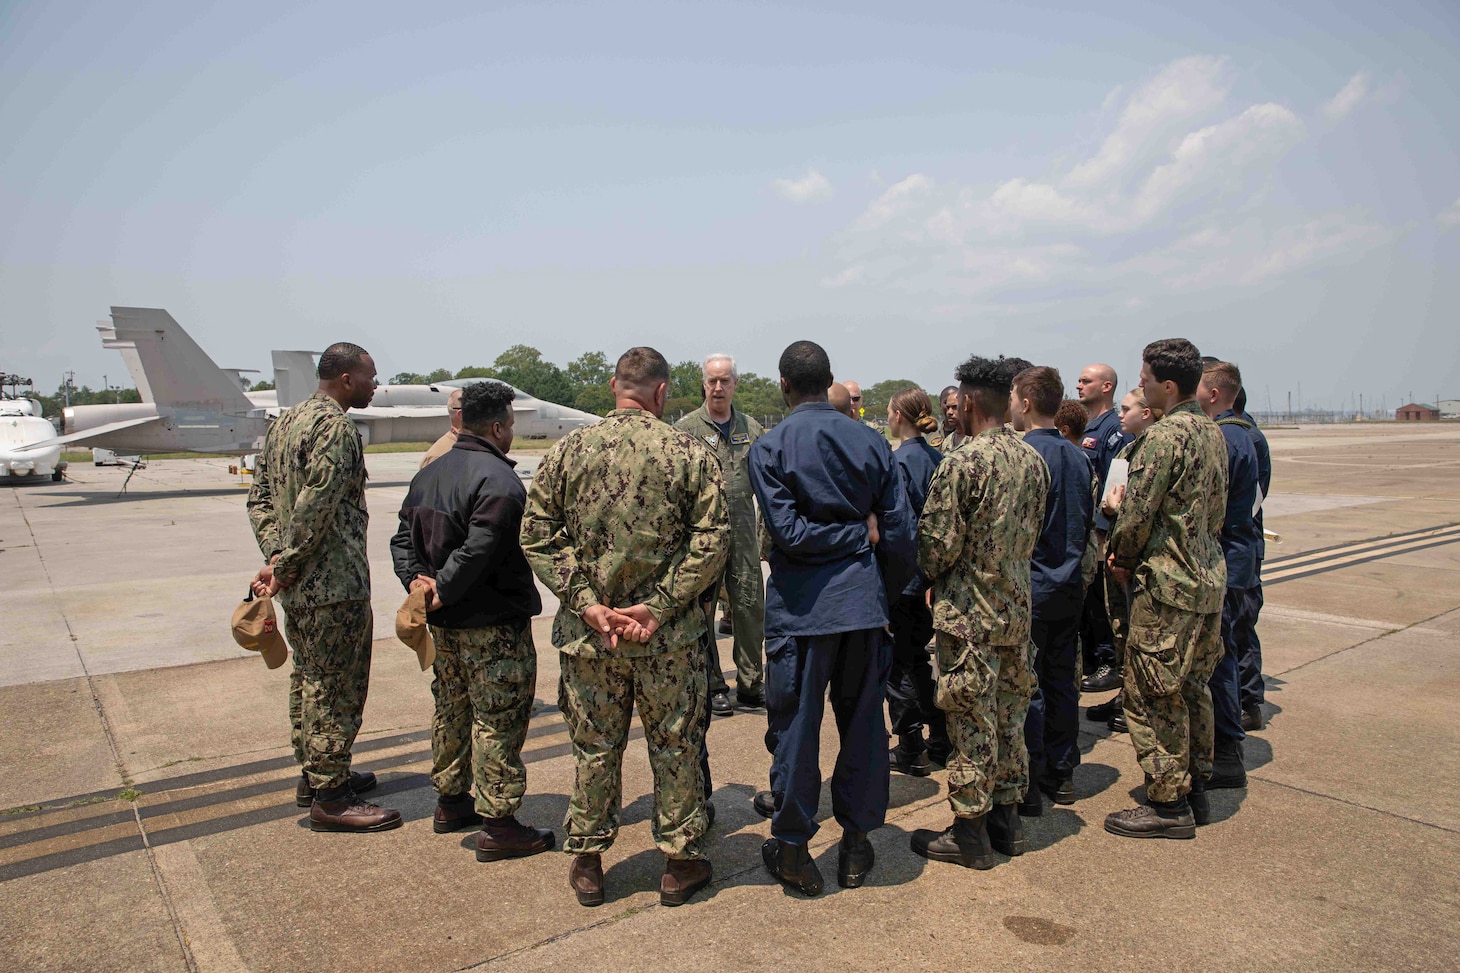 Rear Adm. John Meier, commander, Naval Air Force Atlantic (AIRLANT), congratulates Sailors assigned to the Nimitz-class aircraft carrier USS Harry S. Truman (CVN 75) following their completion of the second Aviation Boatswain's Mate (Handling) University course of instruction on June 9. ABHU is a new course spearheaded by AIRLANT specifically designed for Sailors in the Aviation Boatswain's Mate (Handling) rate. During the course, Sailors refresh their skills and acquire more knowledge through classroom and hands-on training.